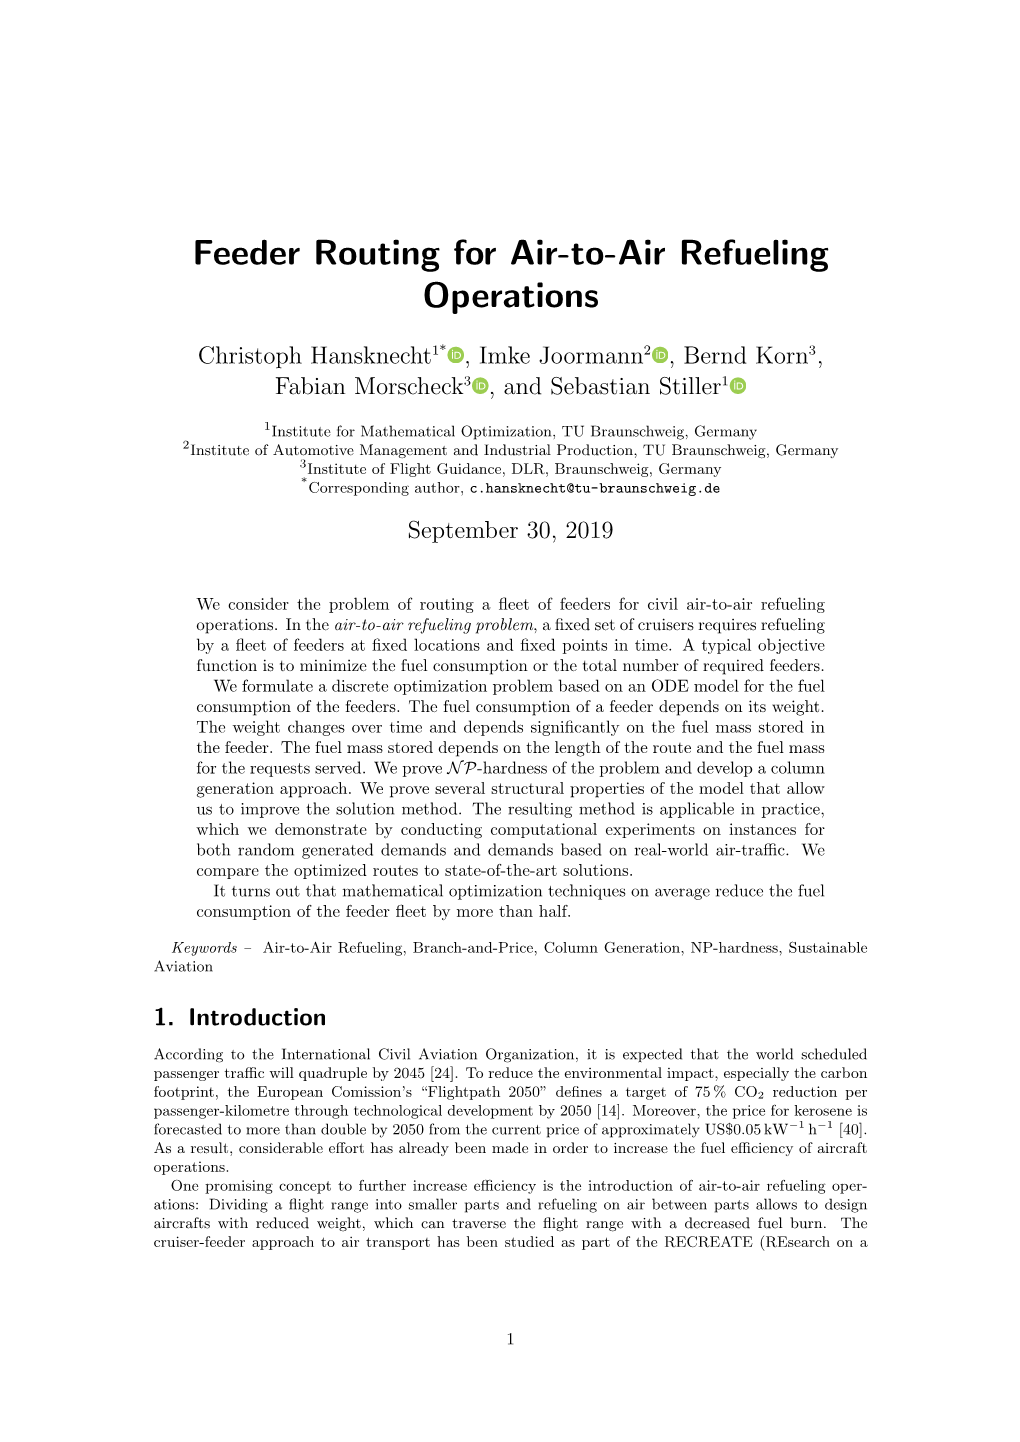 Feeder Routing for Air-To-Air Refueling Operations